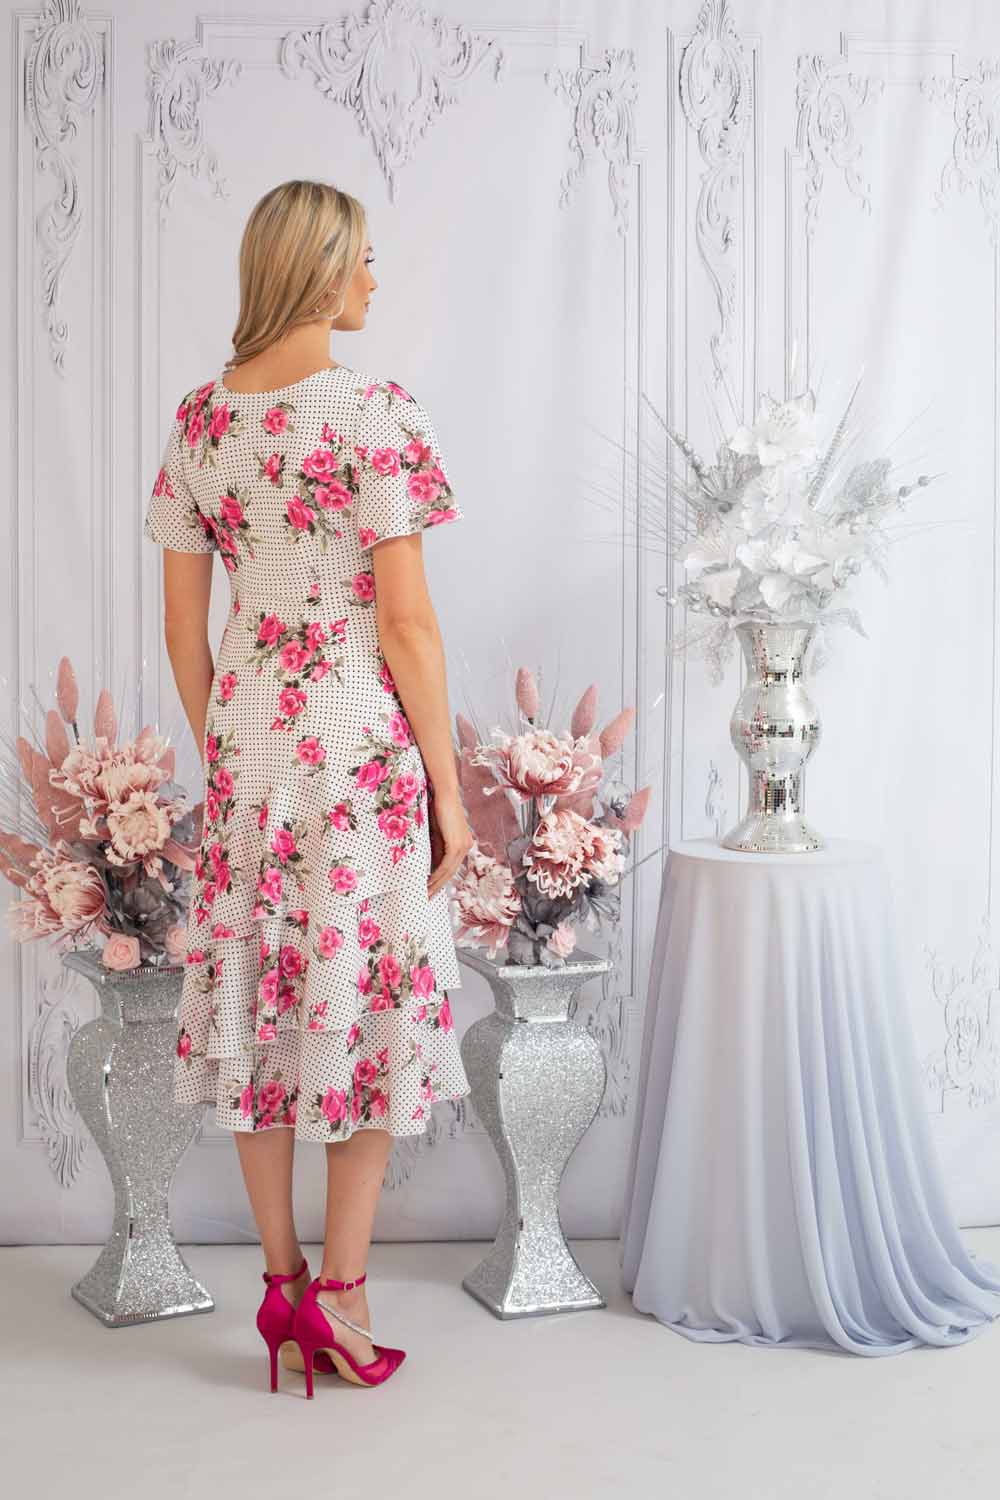 White Julianna Floral Tiered Bias Cut Dress, Image 2 of 4